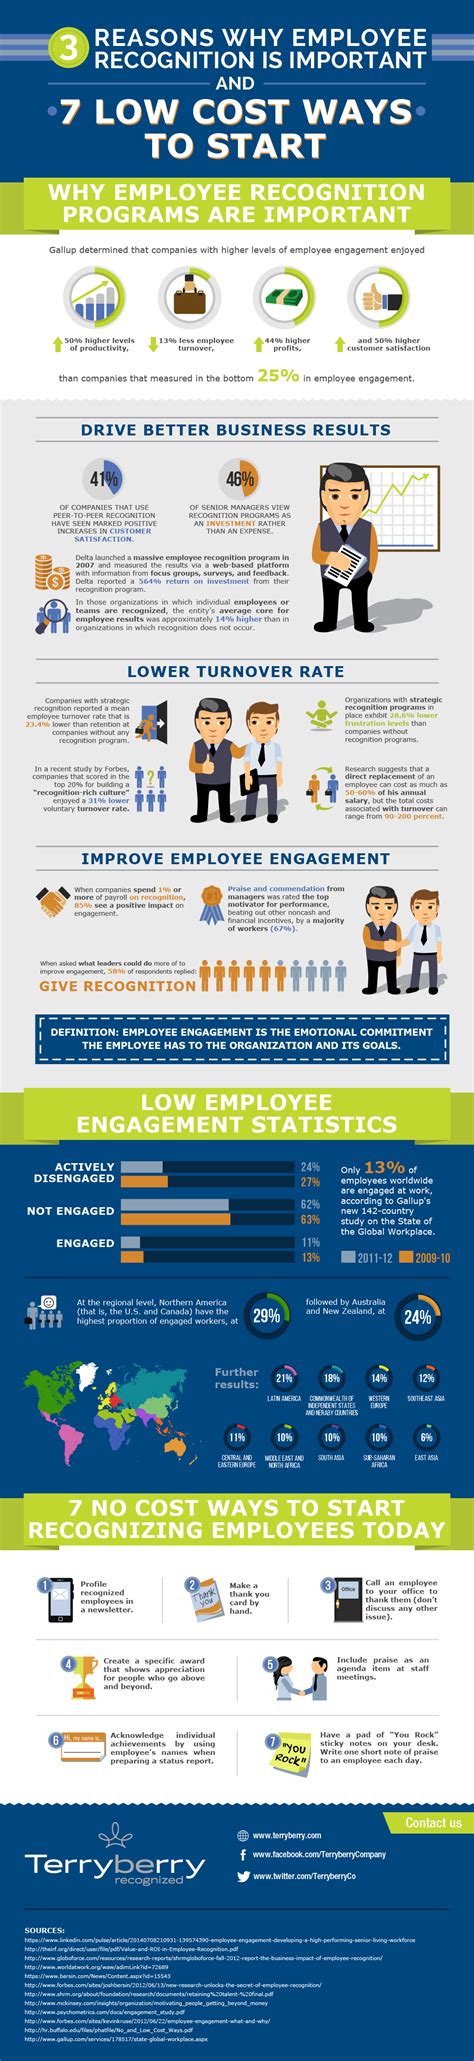 3 Reasons Why Employee Recognition Is Important Infographic